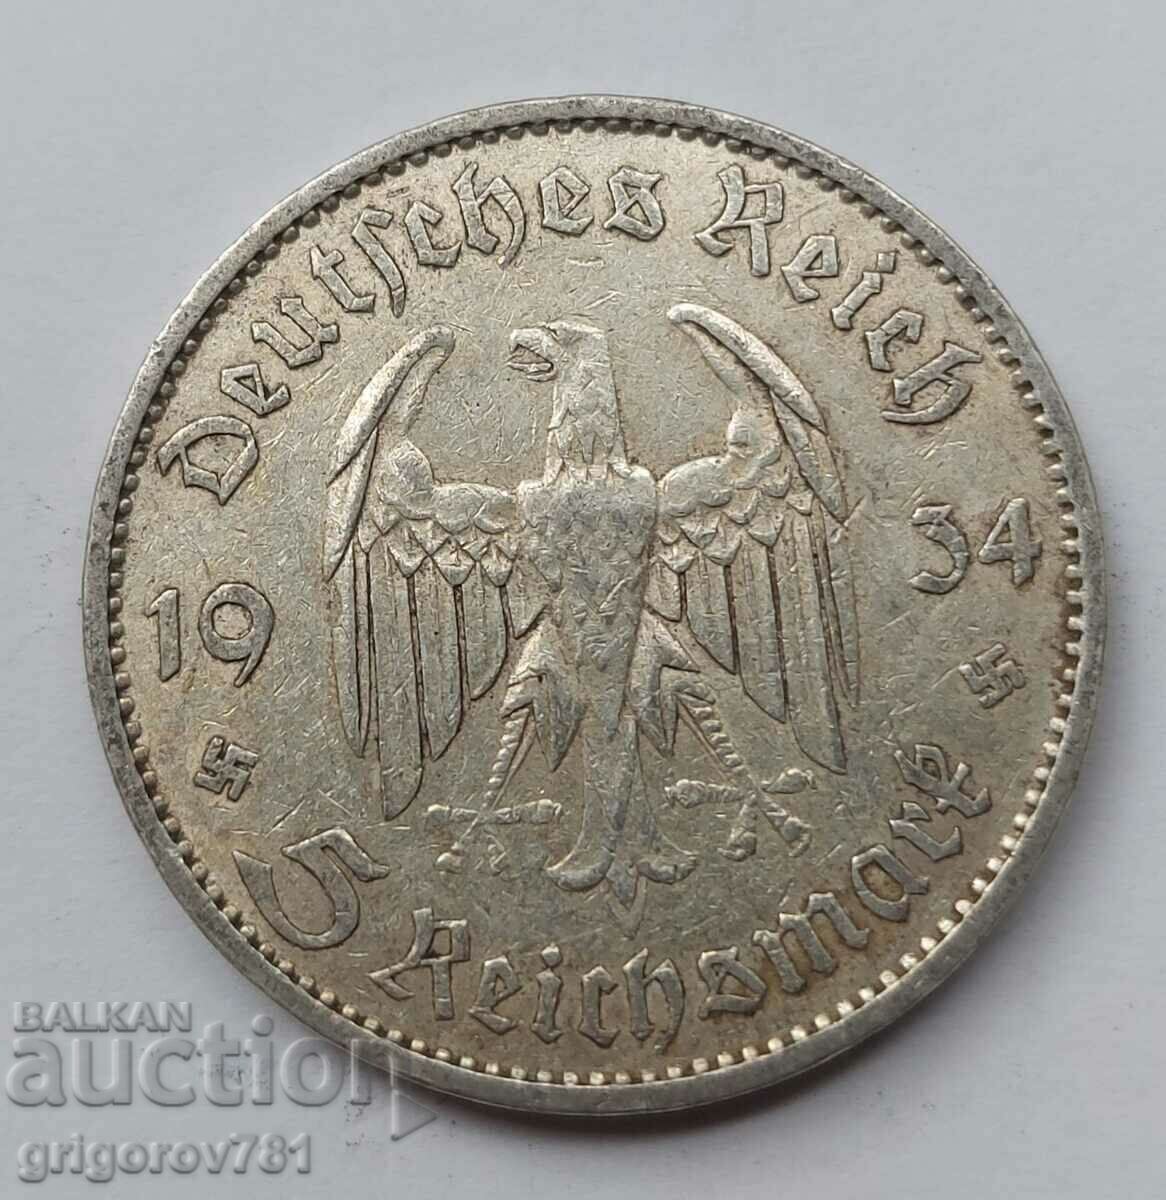 5 Mark Silver Germany 1934 A III Reich Silver Coin #9